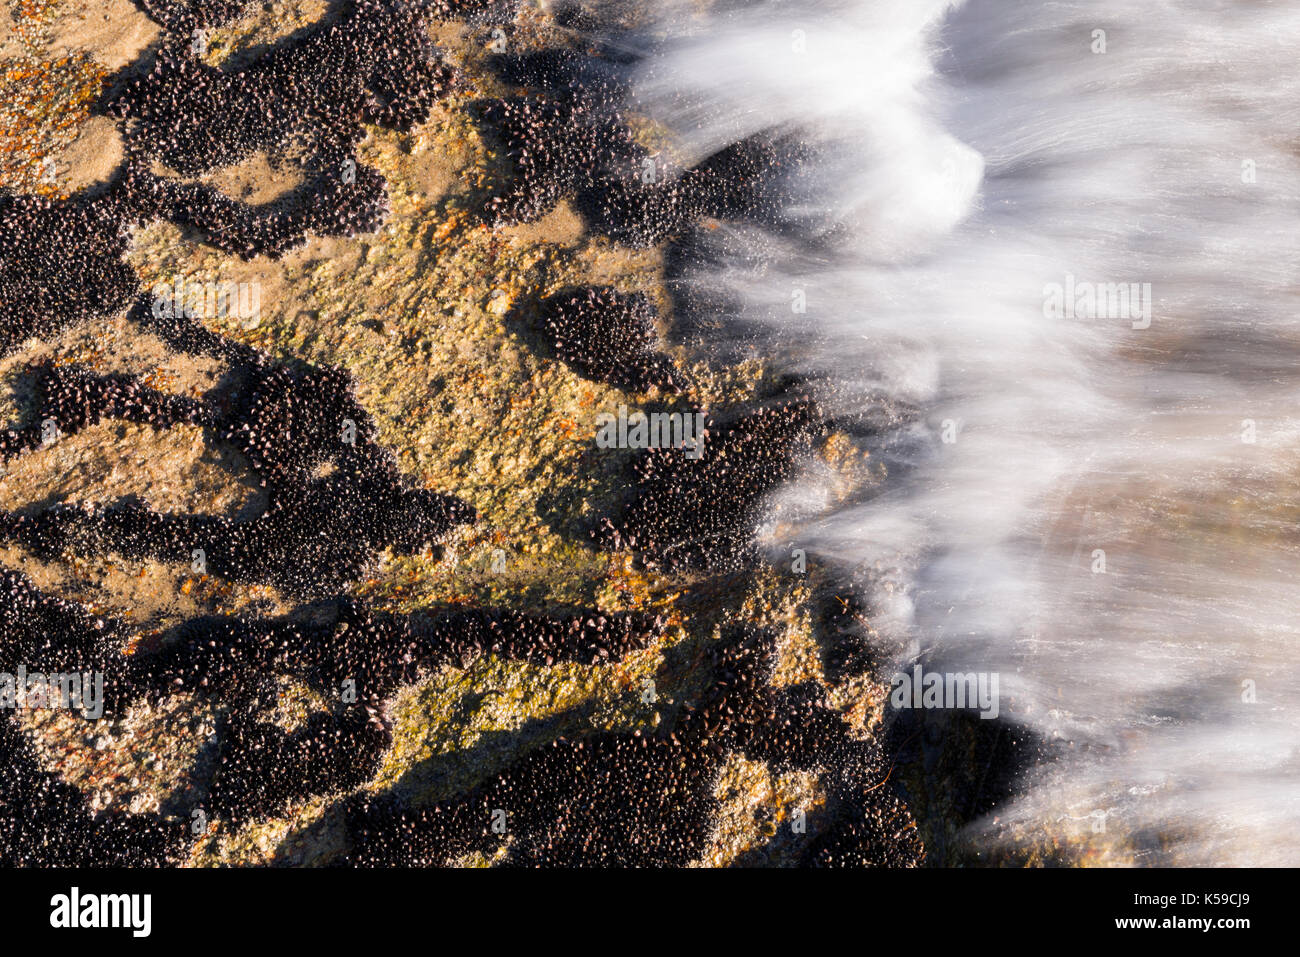 Brachidontes mussel colonies growing on the intertidal zone at Ilhabela, SP, Brazil Stock Photo